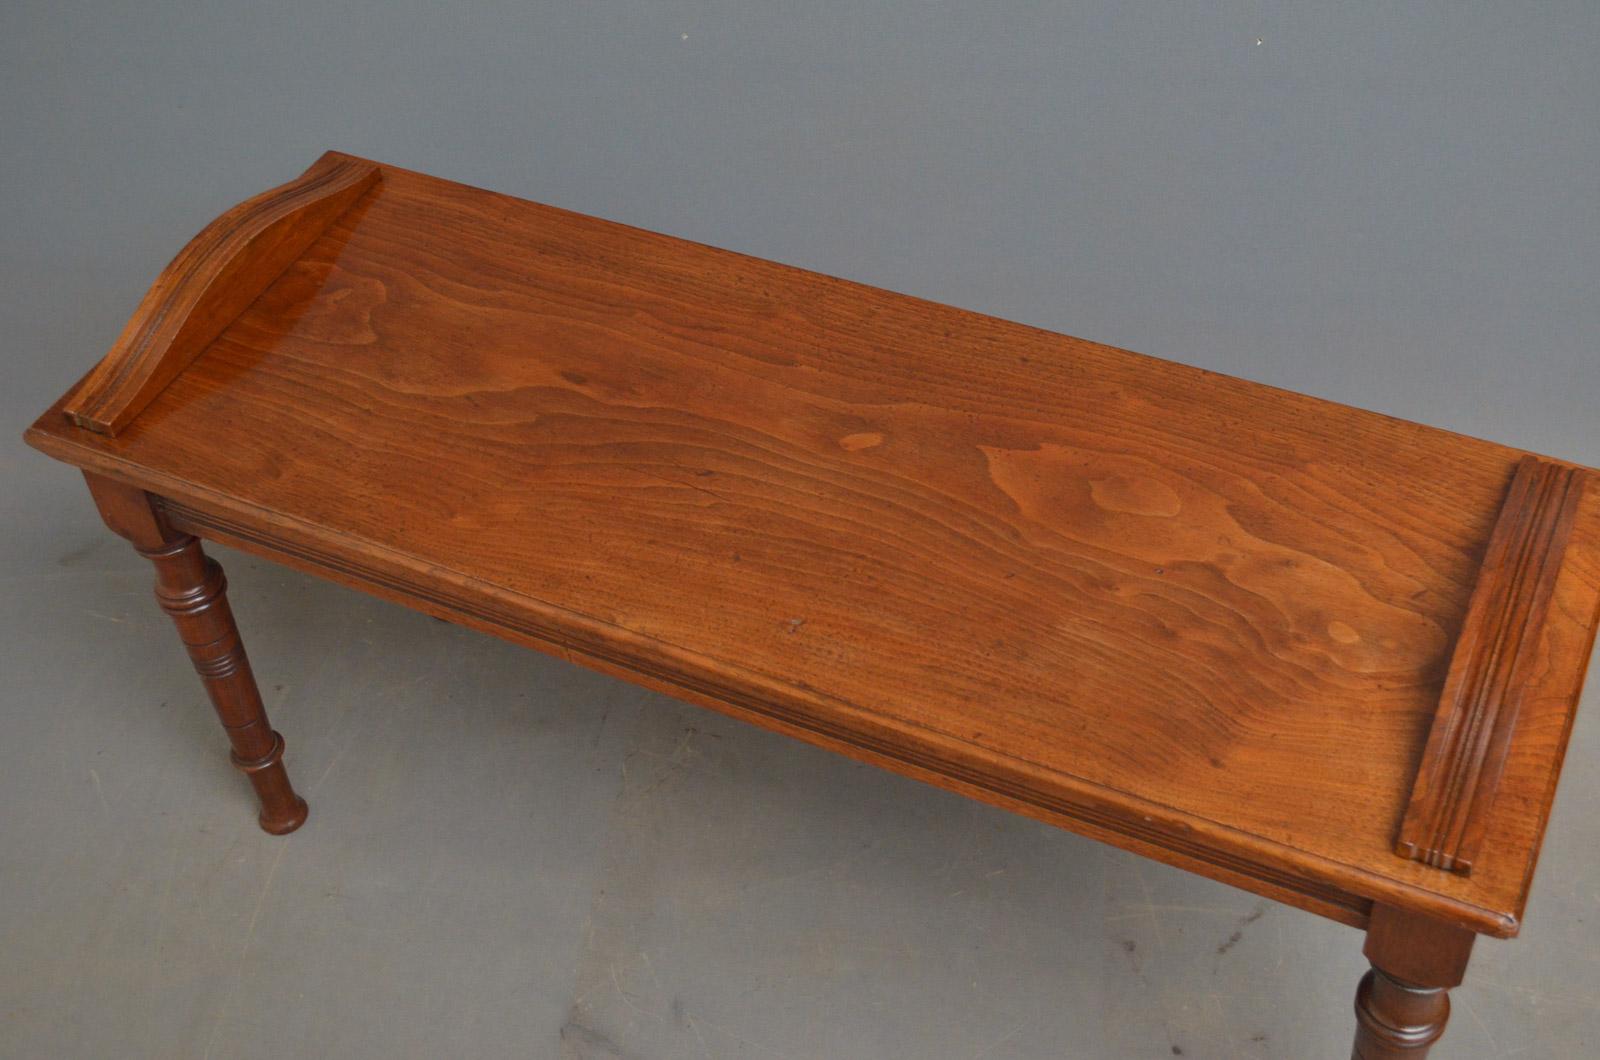 Sn4459 Edwardian solid walnut hall bench with figured seat with shaped ends, reeded frieze and turned legs, all in original condition throughout, ready to place at home. c1900
Measures: H 16.5